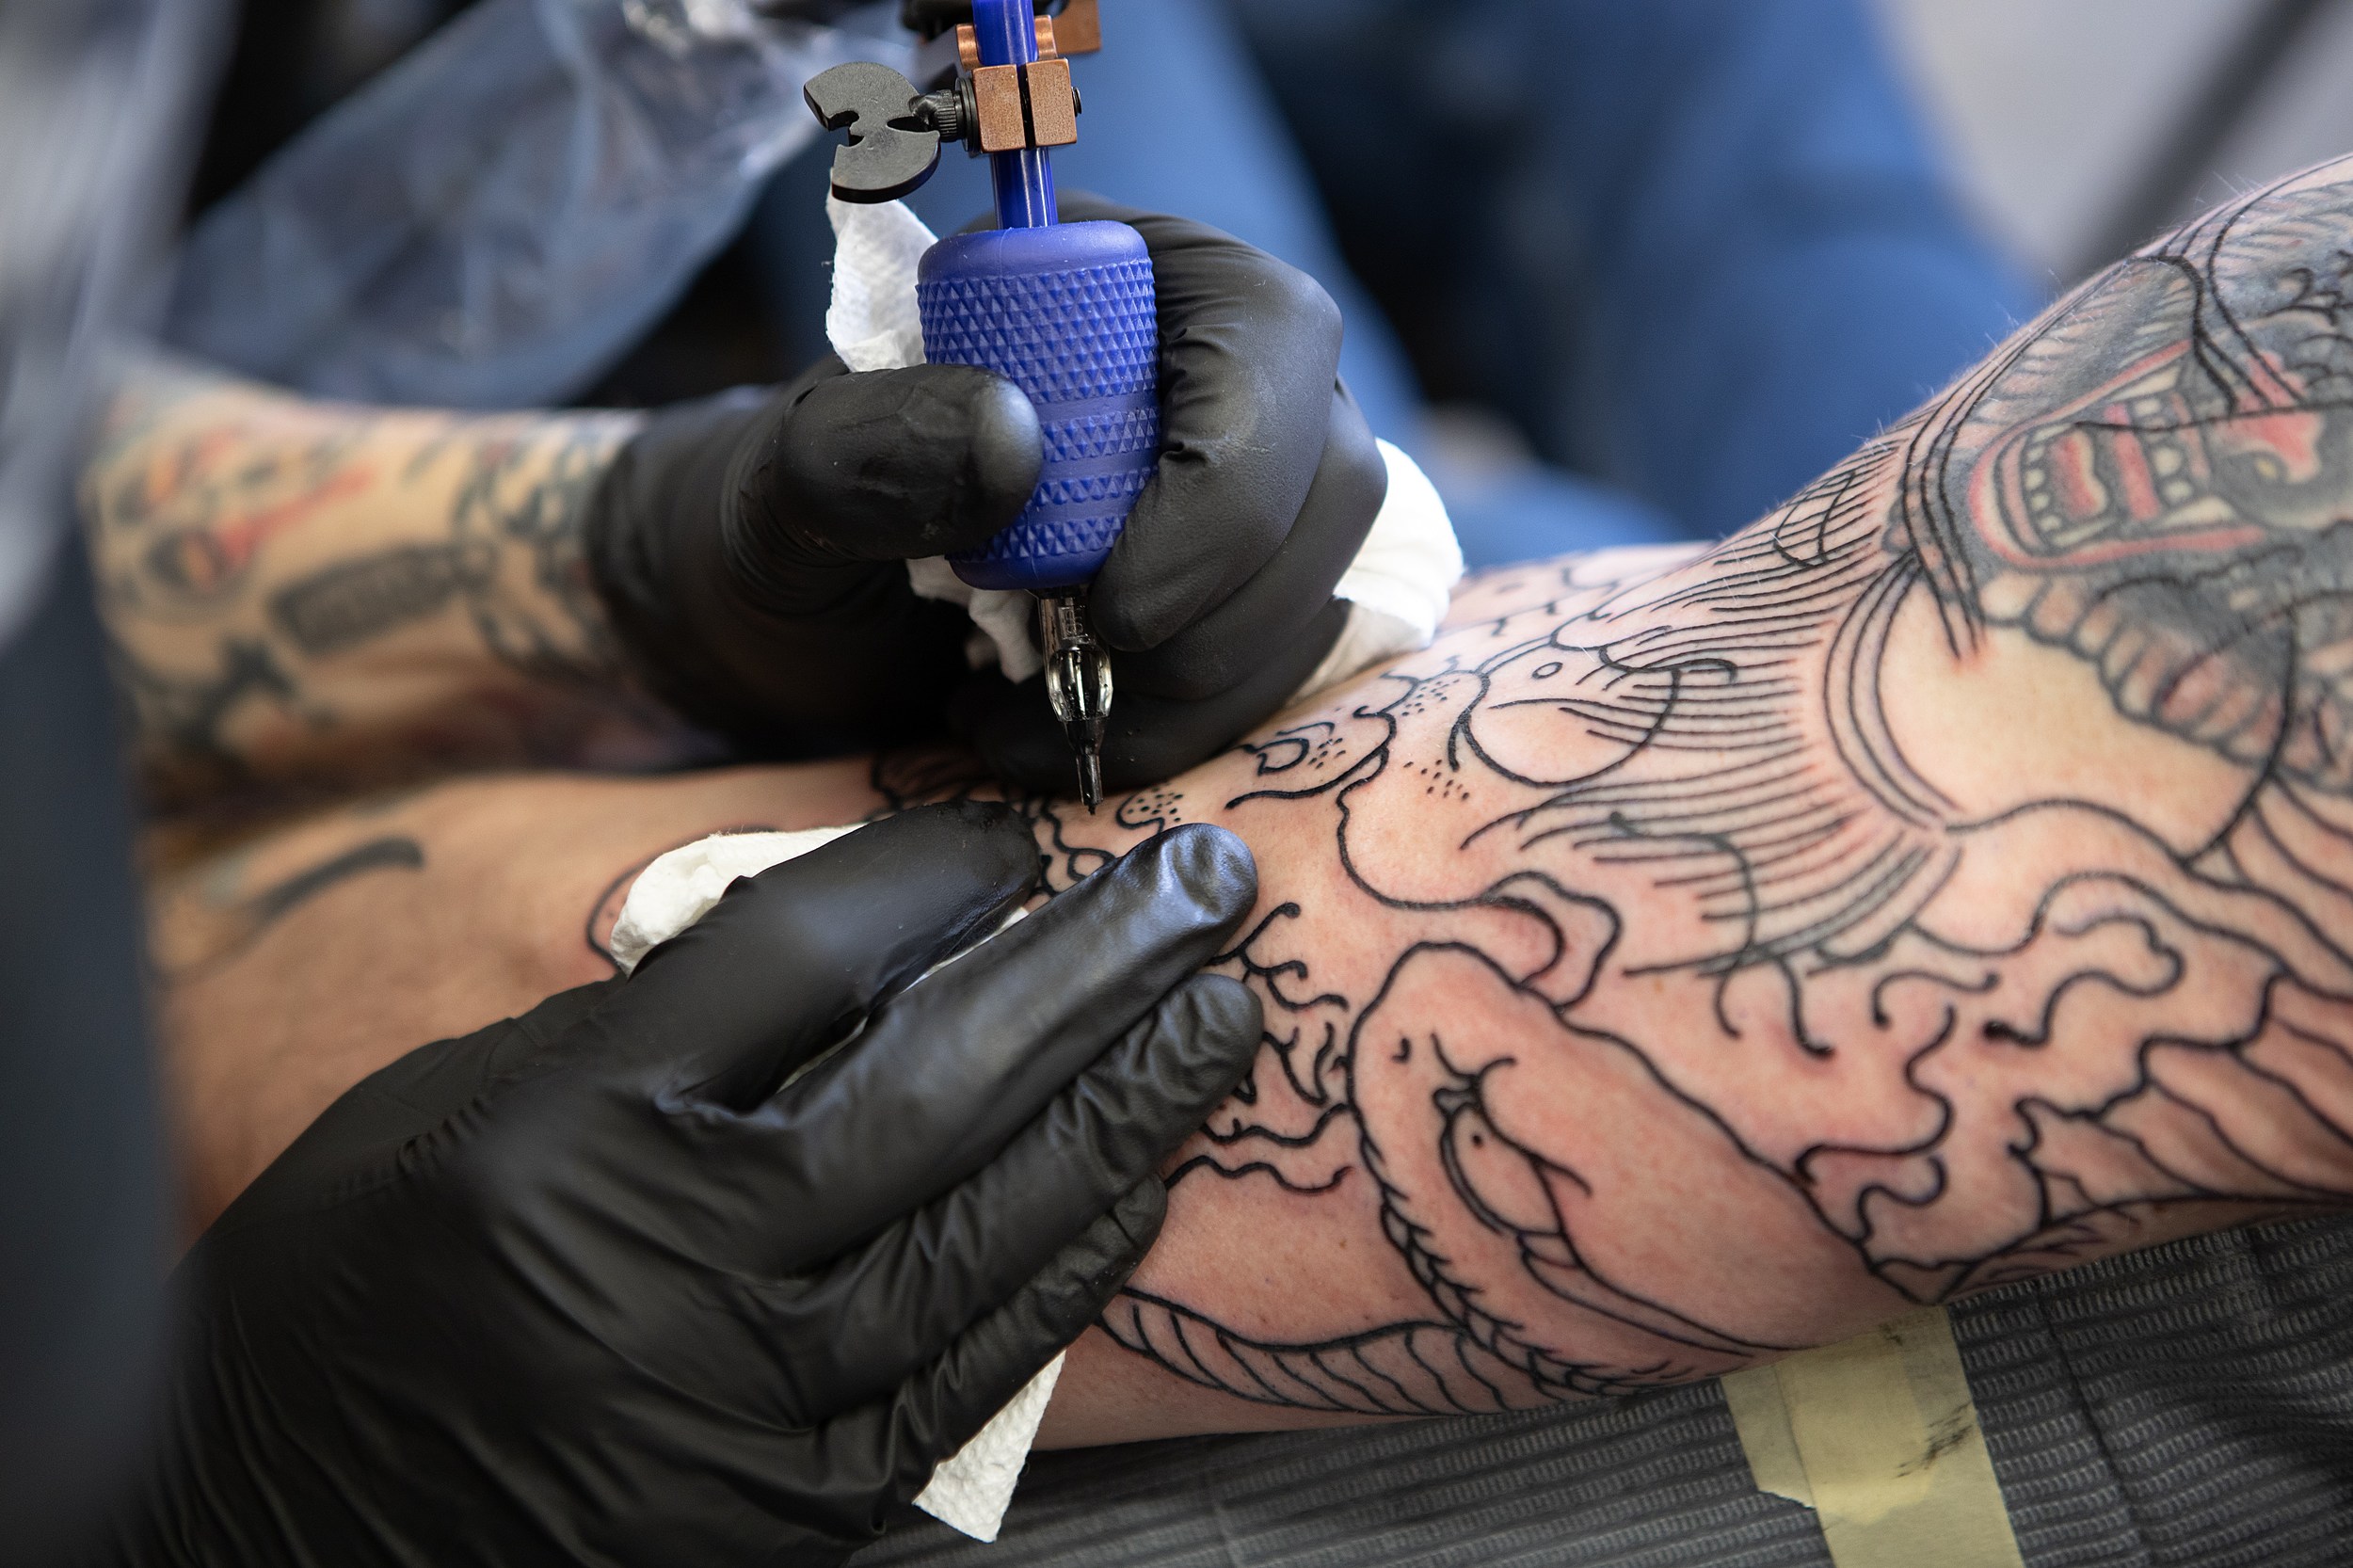 Where Your Tattoo Will Most and Least Likely Fade Over Time